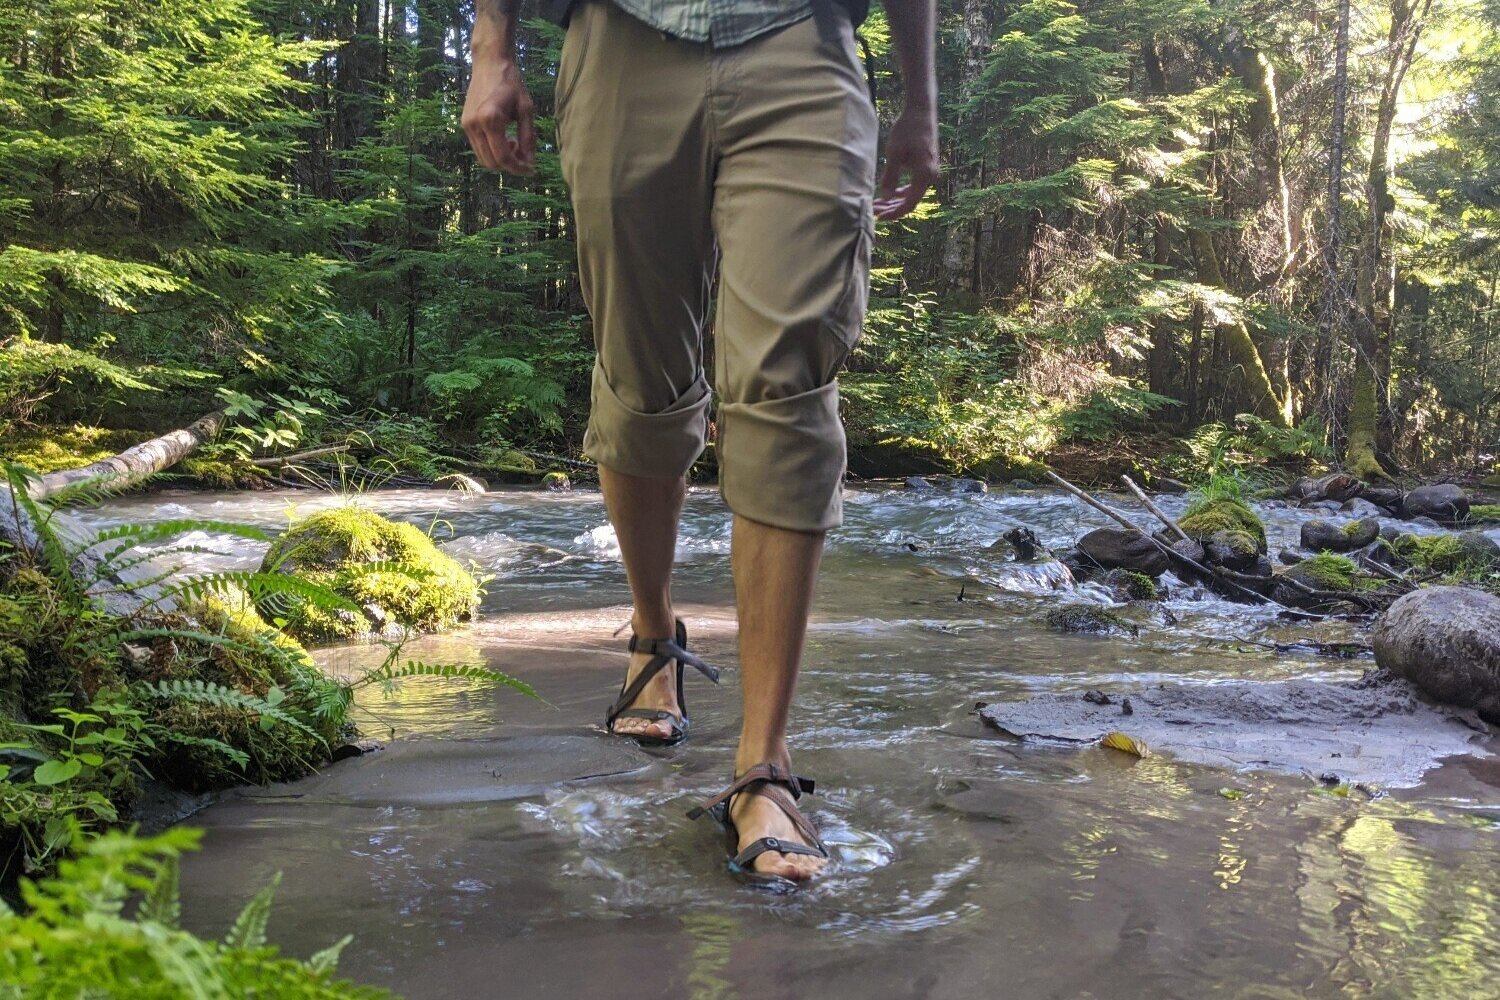 Rocking the ultralight Xero Shoes Z Trail for a river crossing.